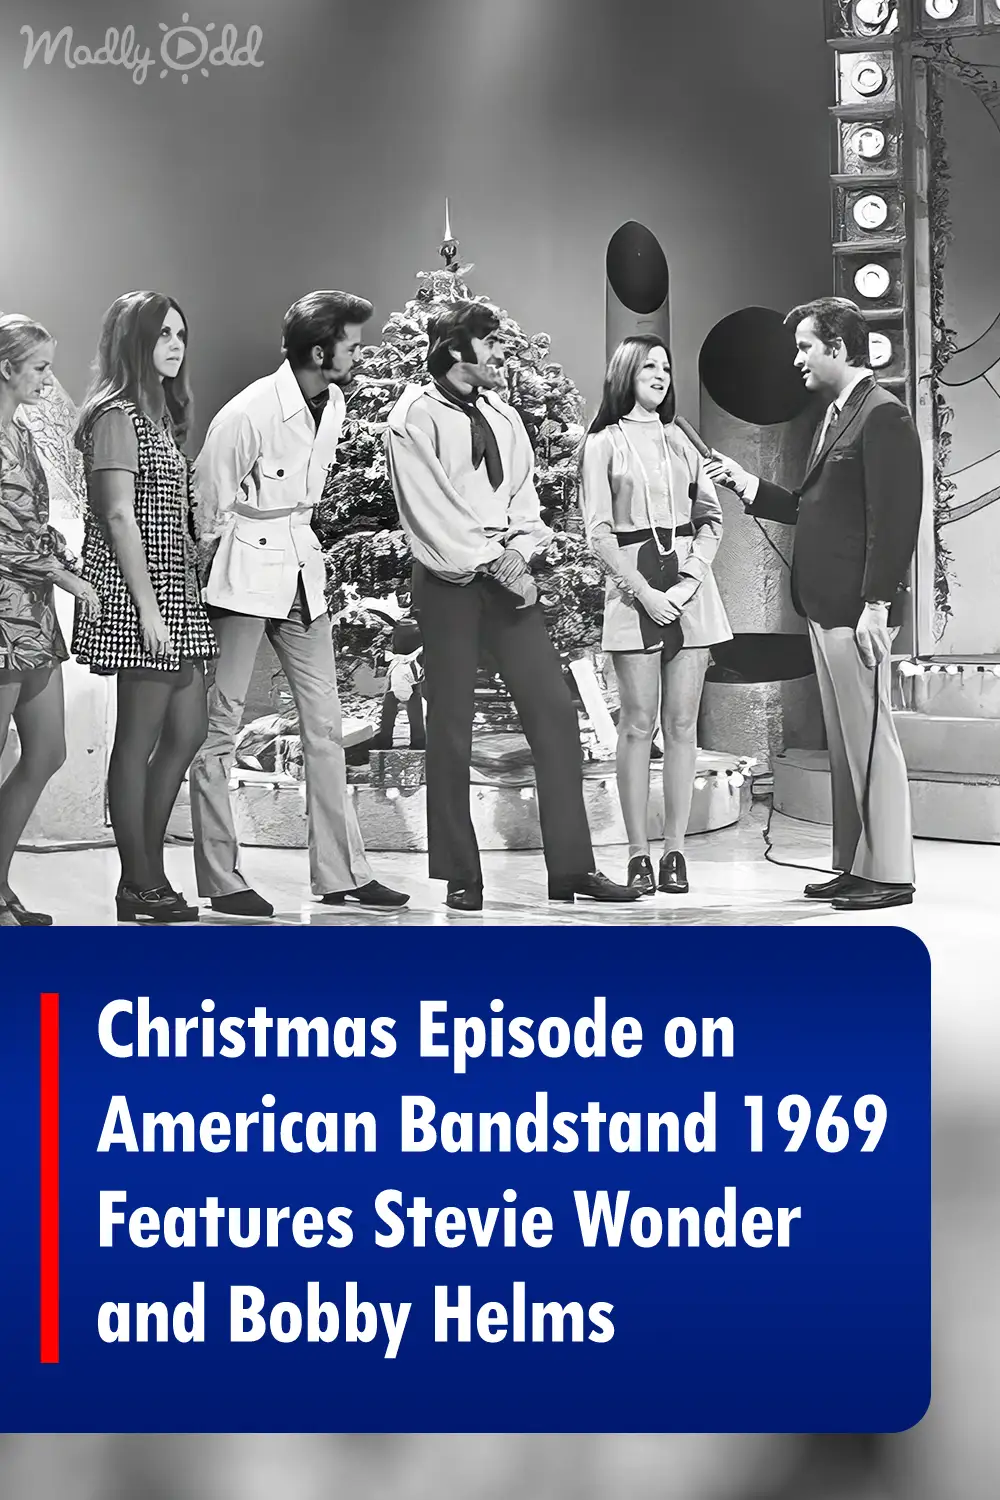 Christmas Episode on American Bandstand 1969 Features Stevie Wonder and Bobby Helms